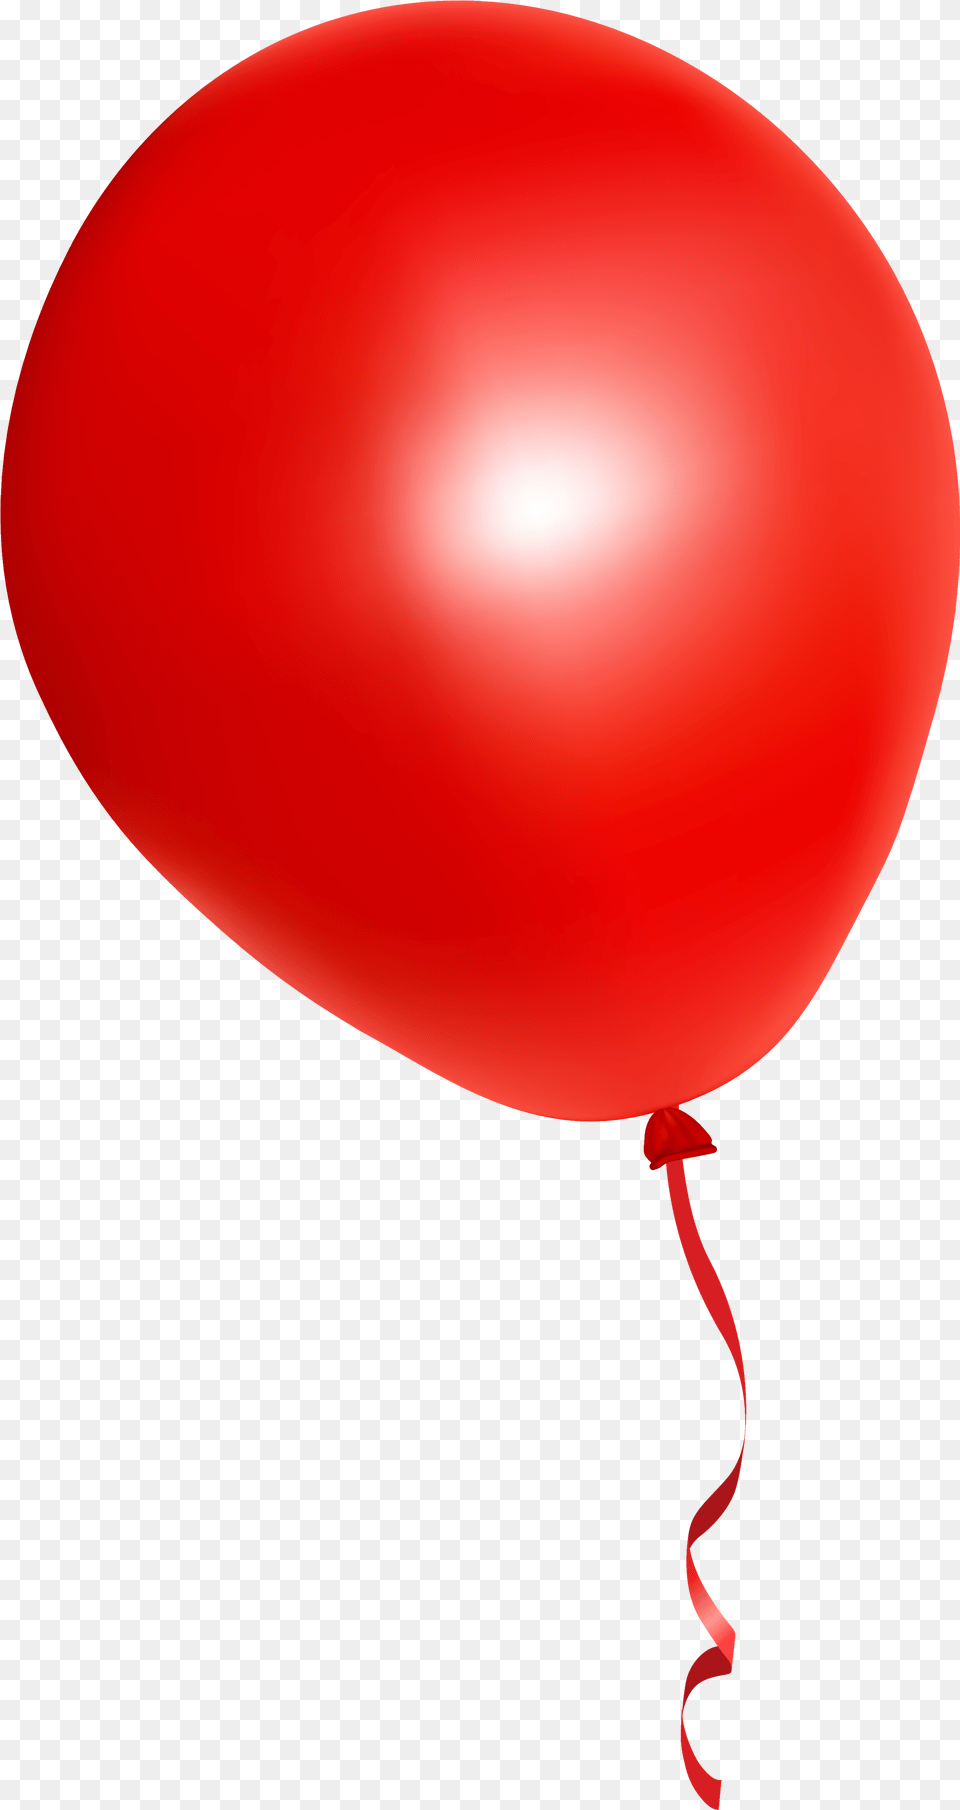 Red Balloon Transparent Background Png